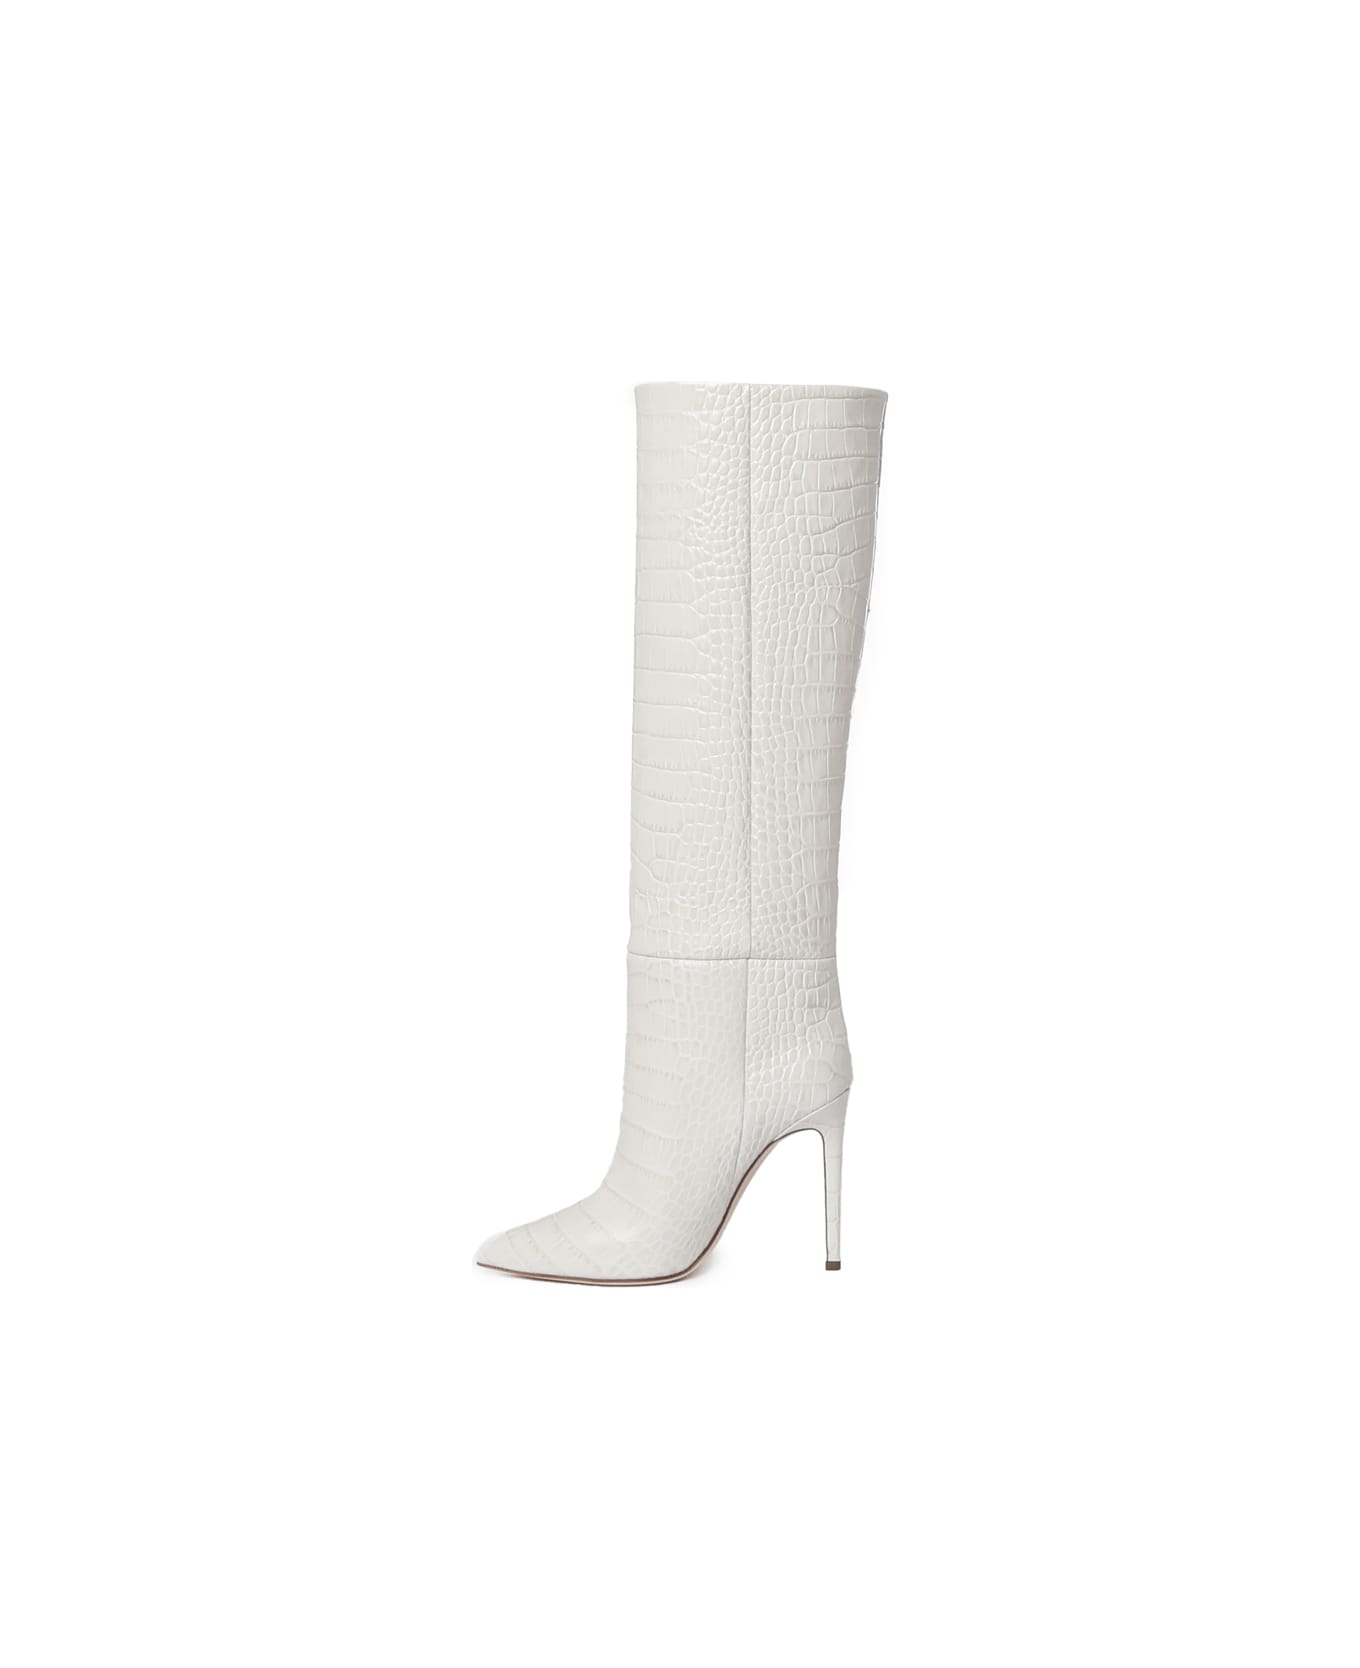 Paris Texas Crocodile Embossed Leather Boots - White